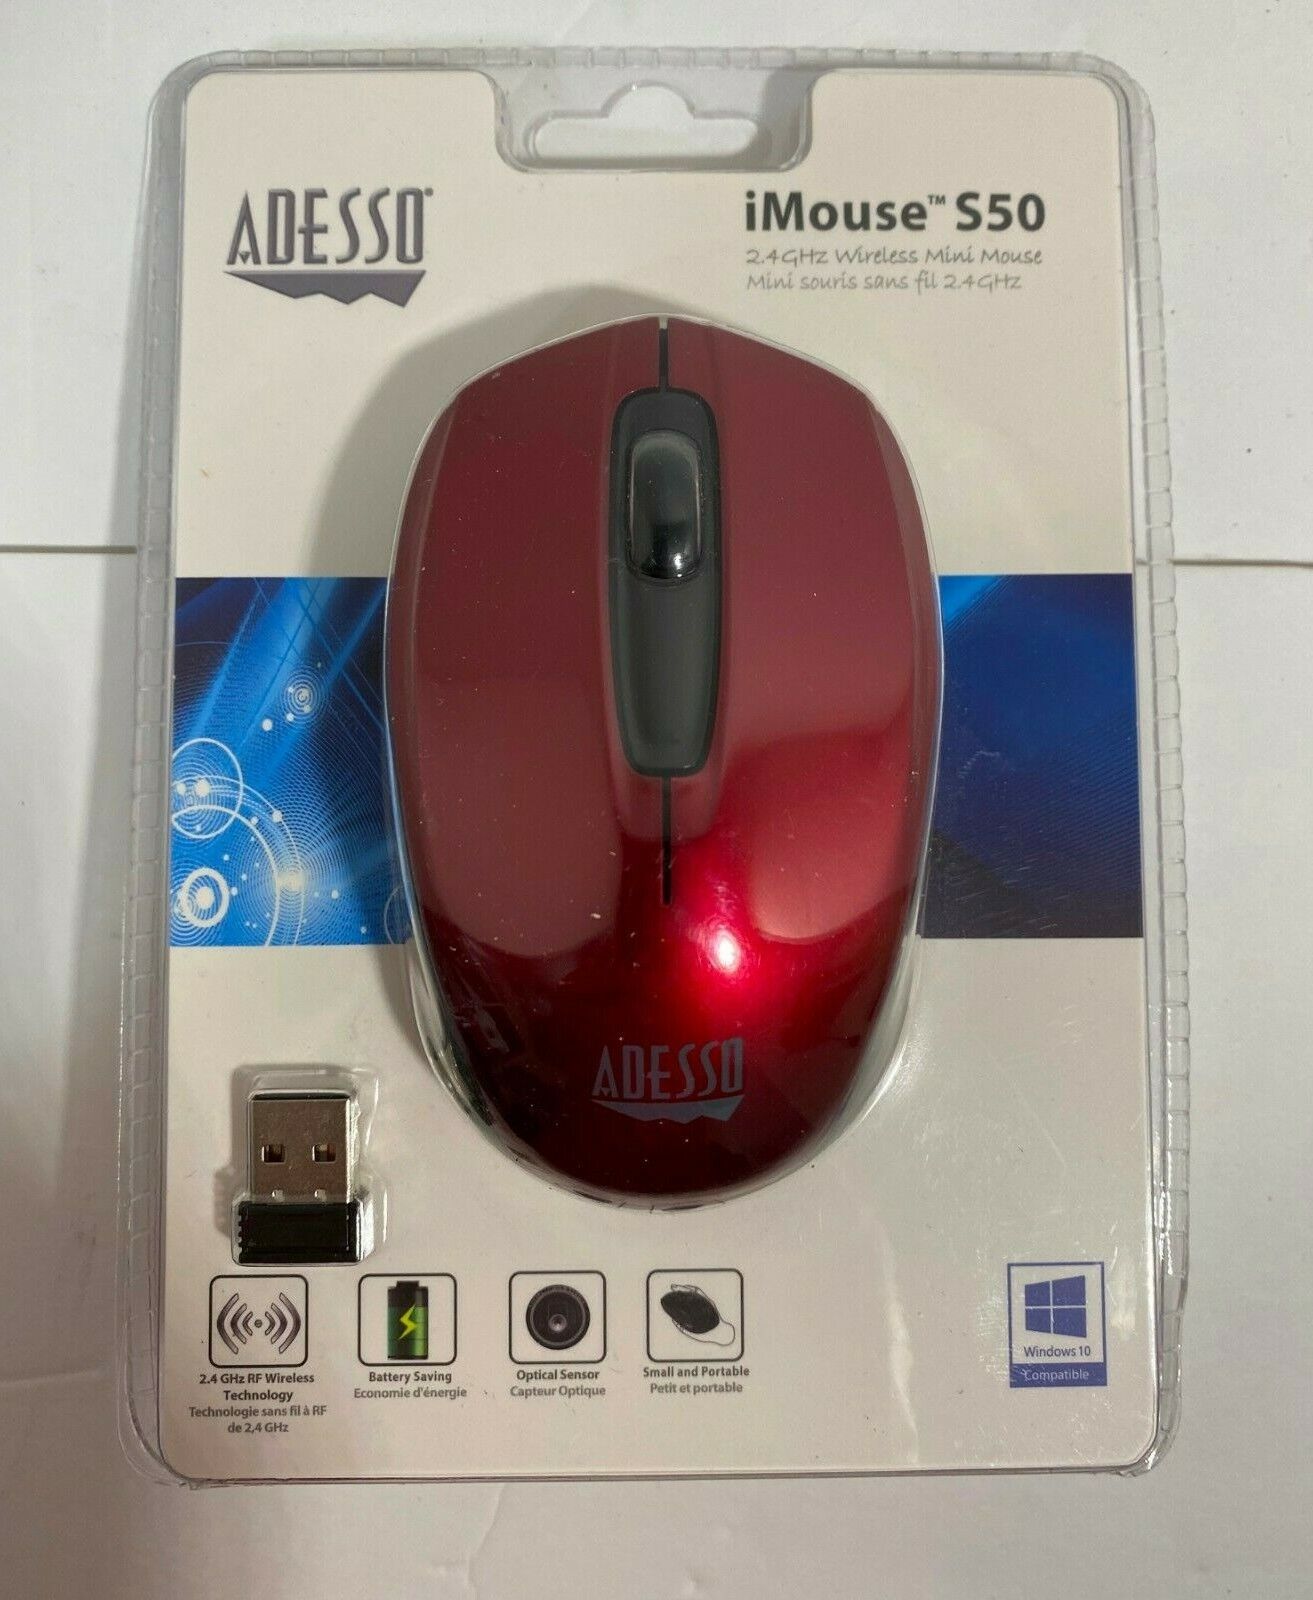  Adesso iMouse S50 2.4 GHz Wireless Optical Mini Mouse Metallic Red. New